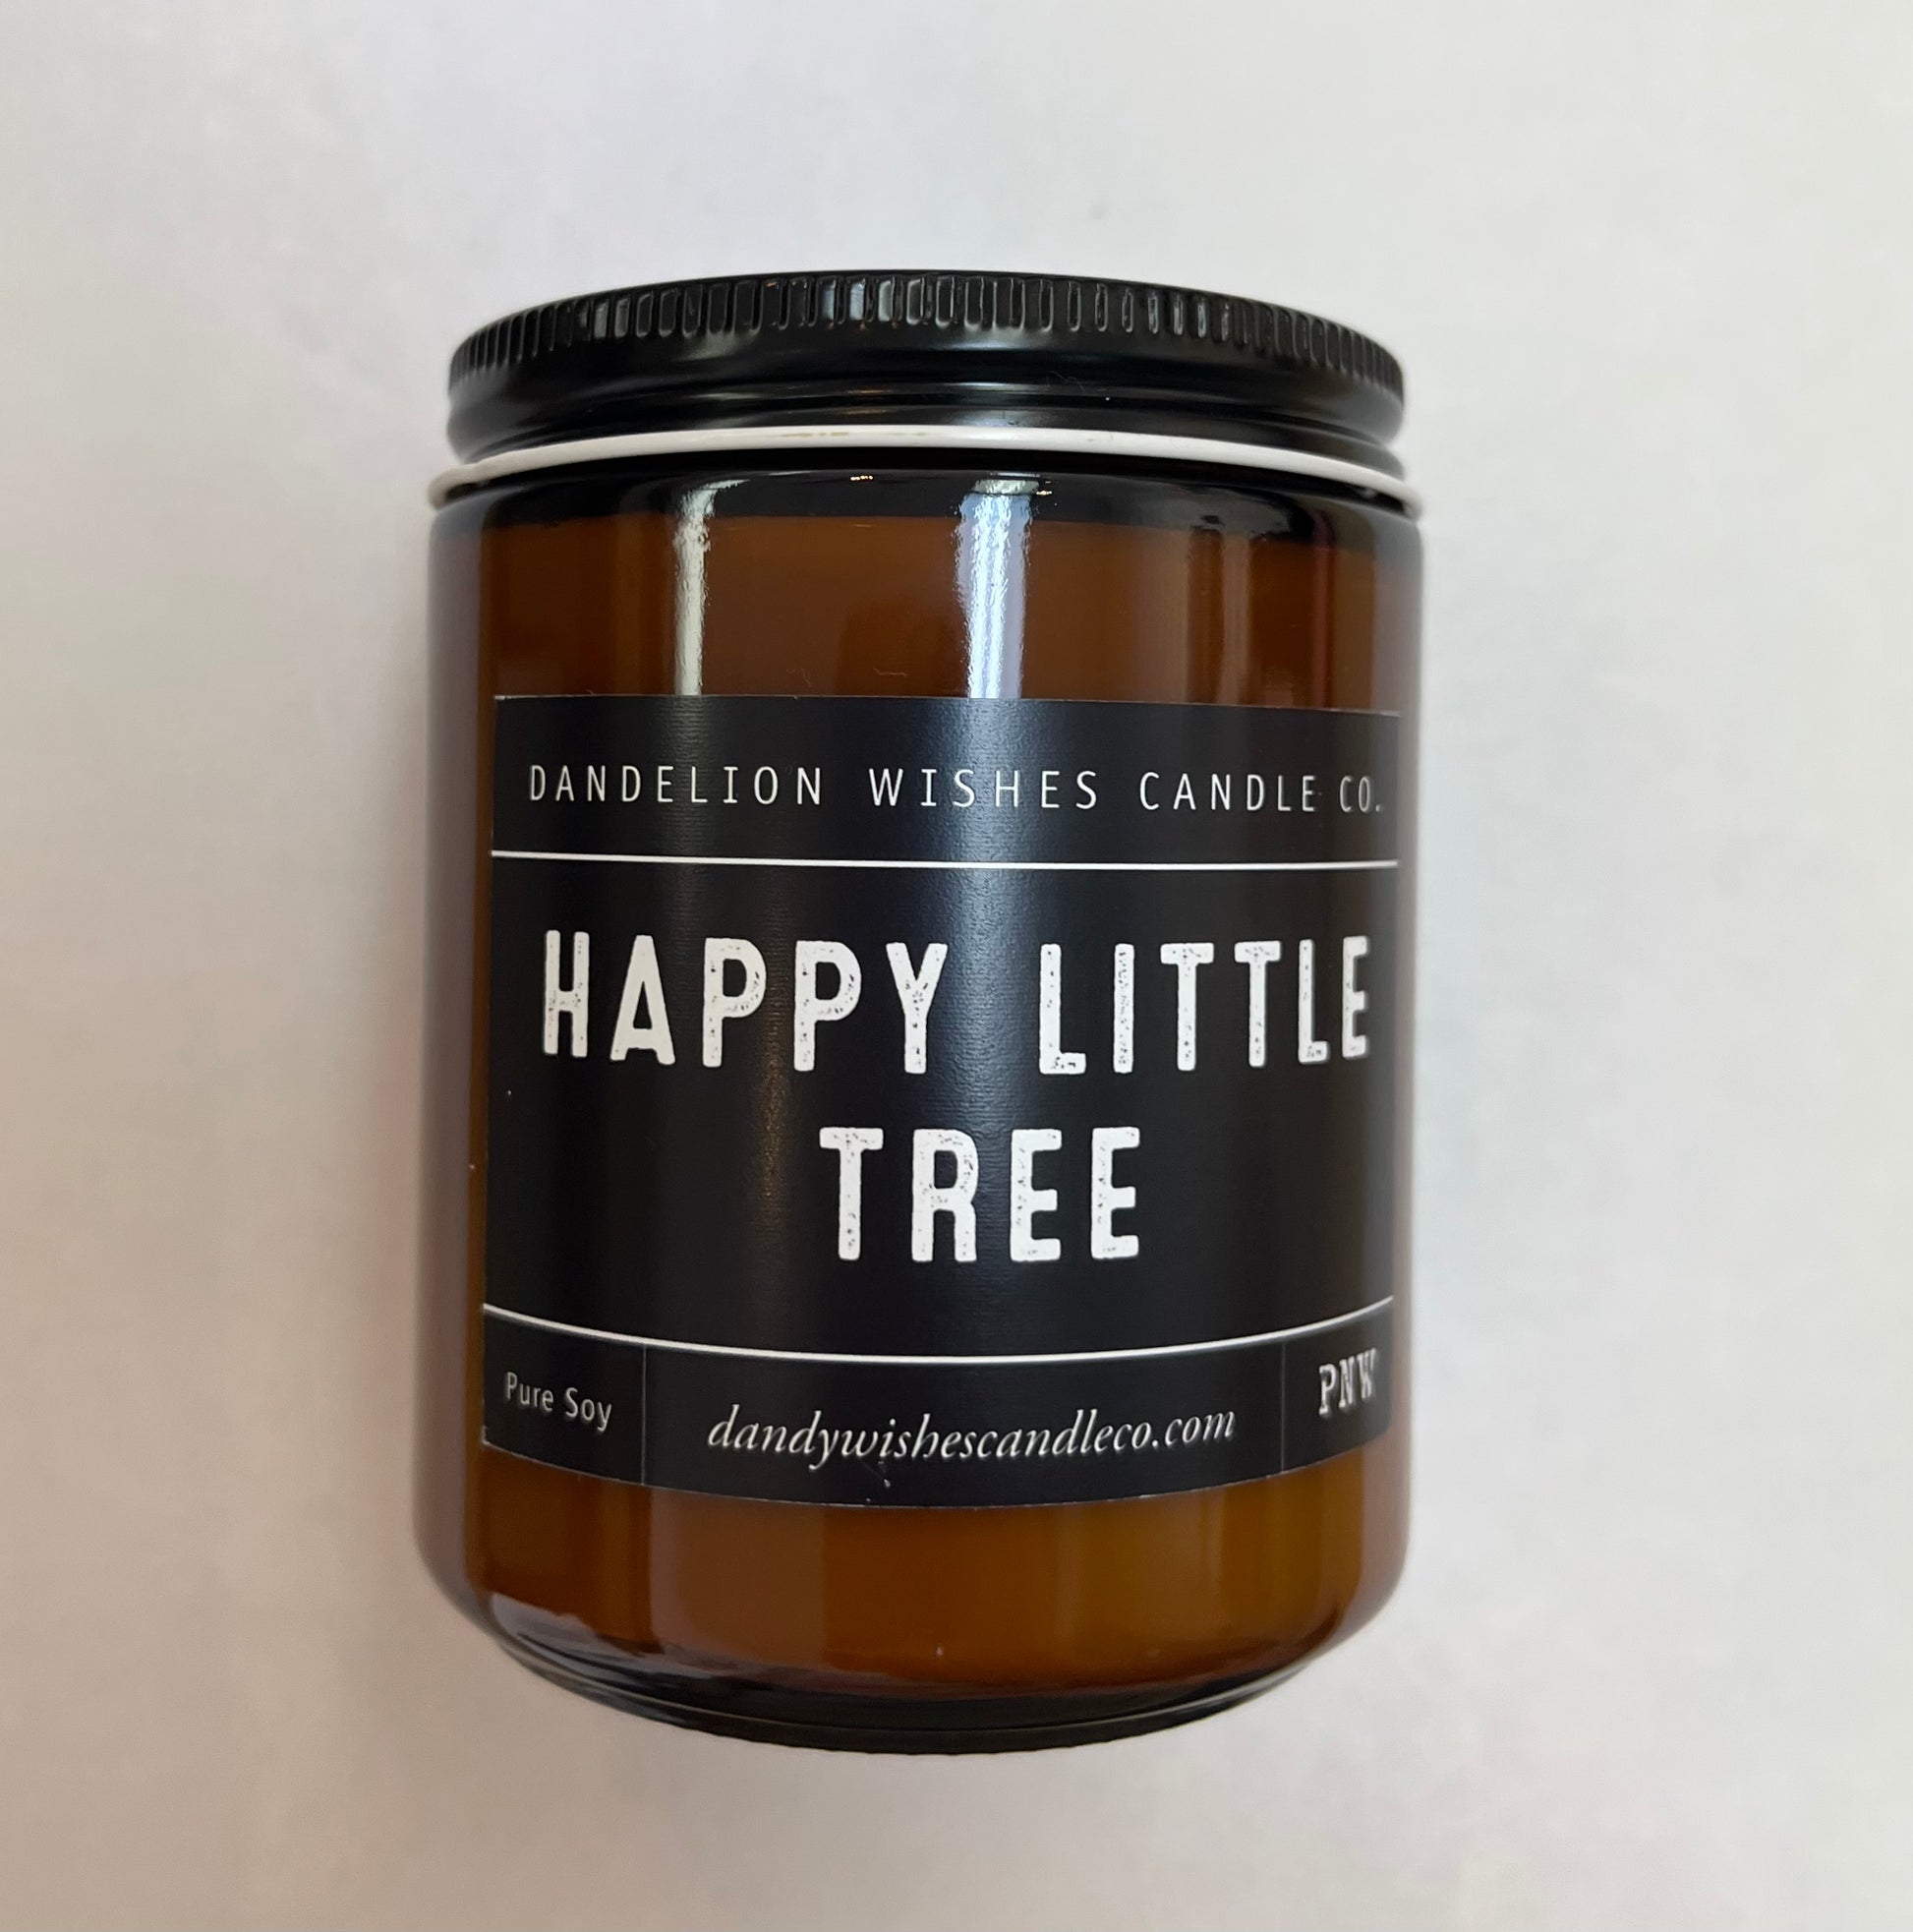 Handmade Amber Candle - Storm and Sky Shoppe - Dandelion Wishes Candle Co.